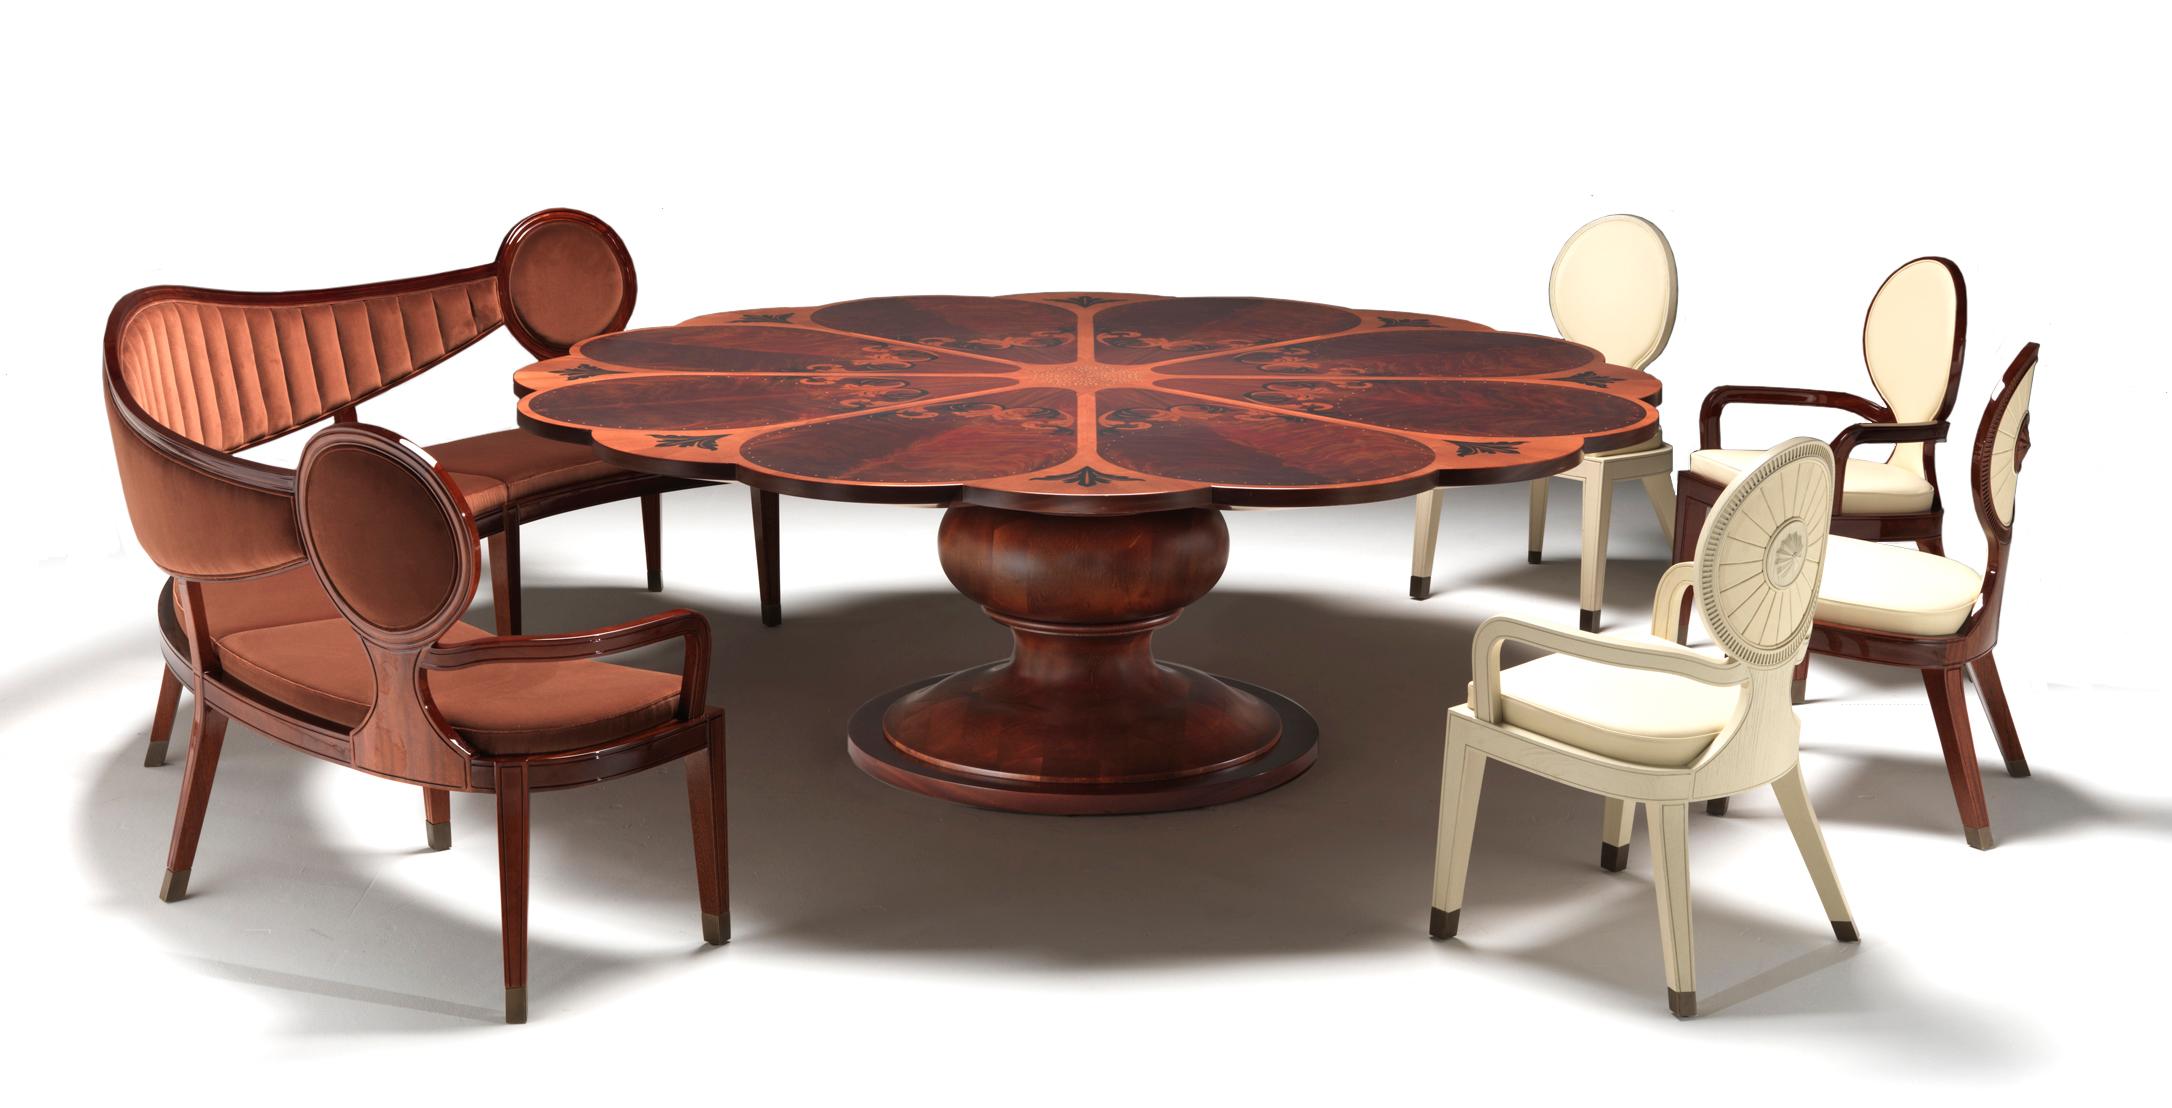 Polished ENGLISH ROSE Round Inlayed Dining Table in Solid Mahogany Wood and Brass For Sale